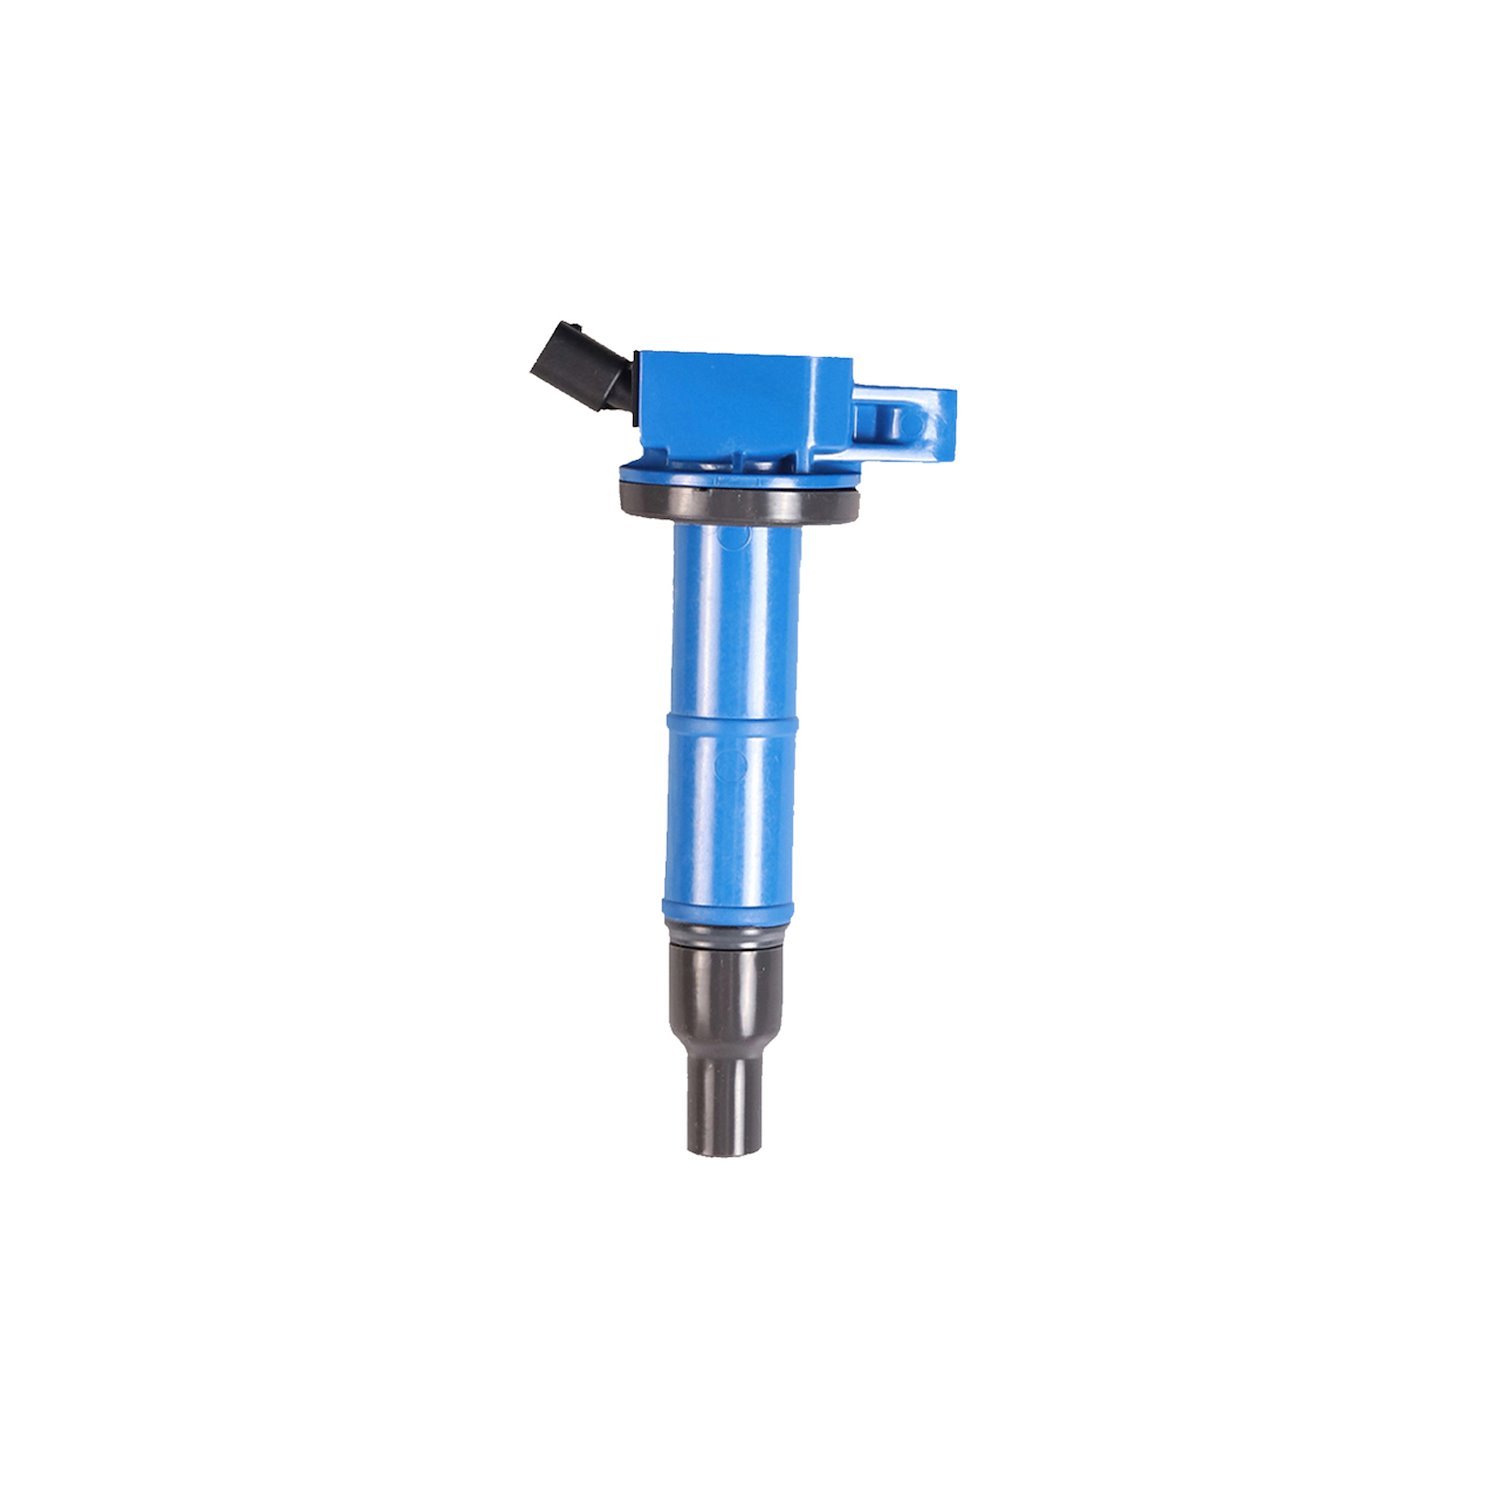 High-Performance Ignition Coil for Toyota Camry 2.4L [Blue]